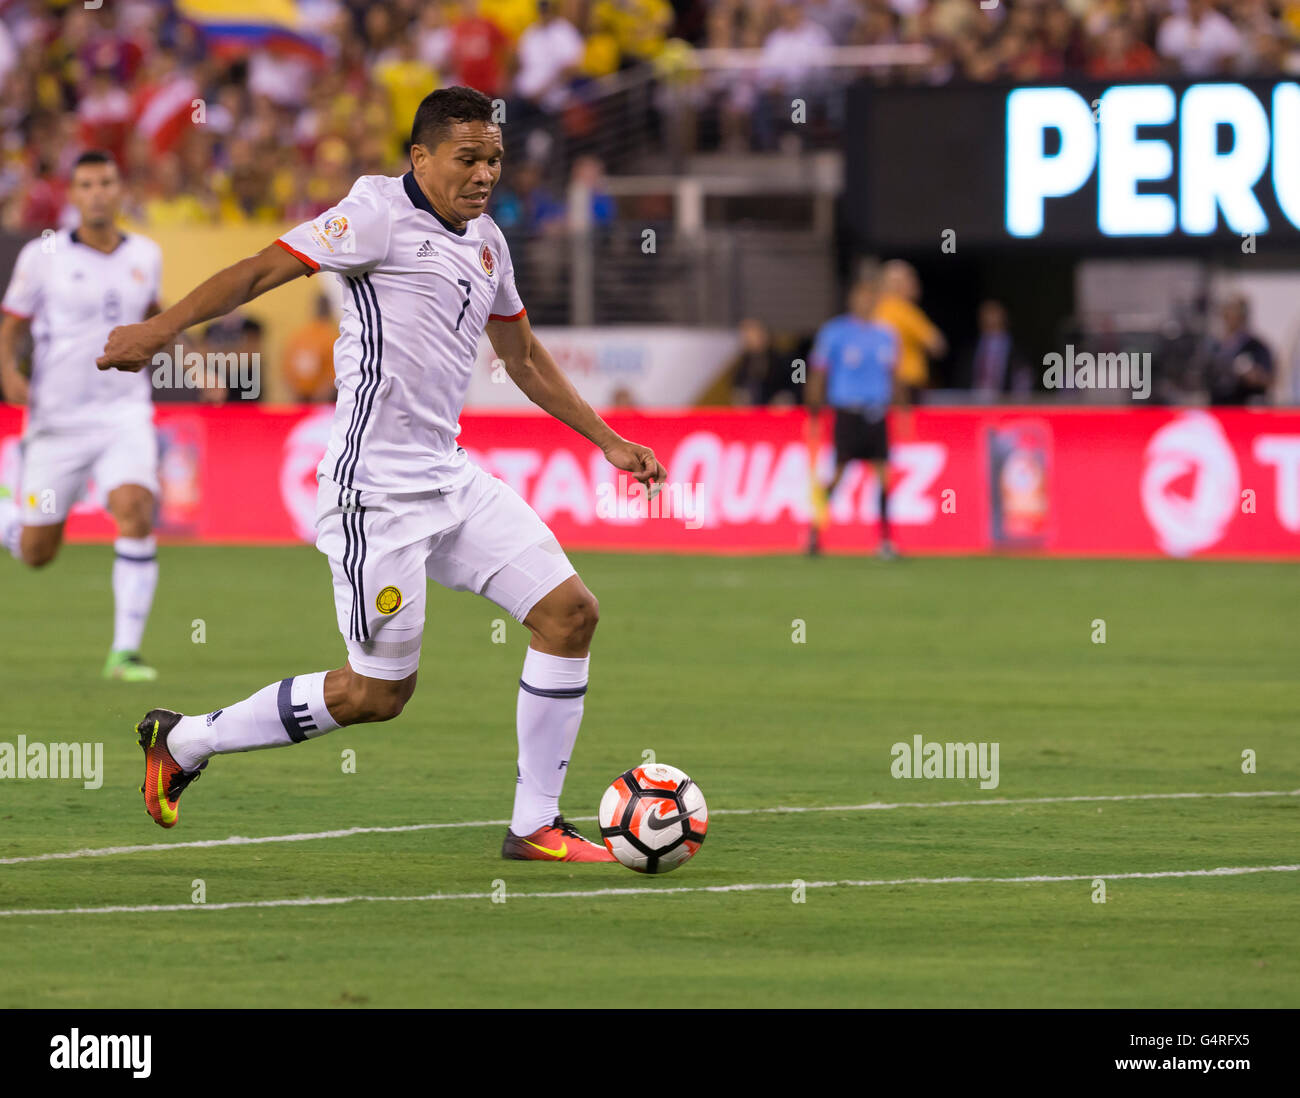 East Rutherford, NJ USA - June 17, 2016: Carlos Bacca (7) of Columbia controls ball during quaterfinal game between Columbia & Peru. Columbia won 0 (4) - 0 (2) by penalty kicks Stock Photo